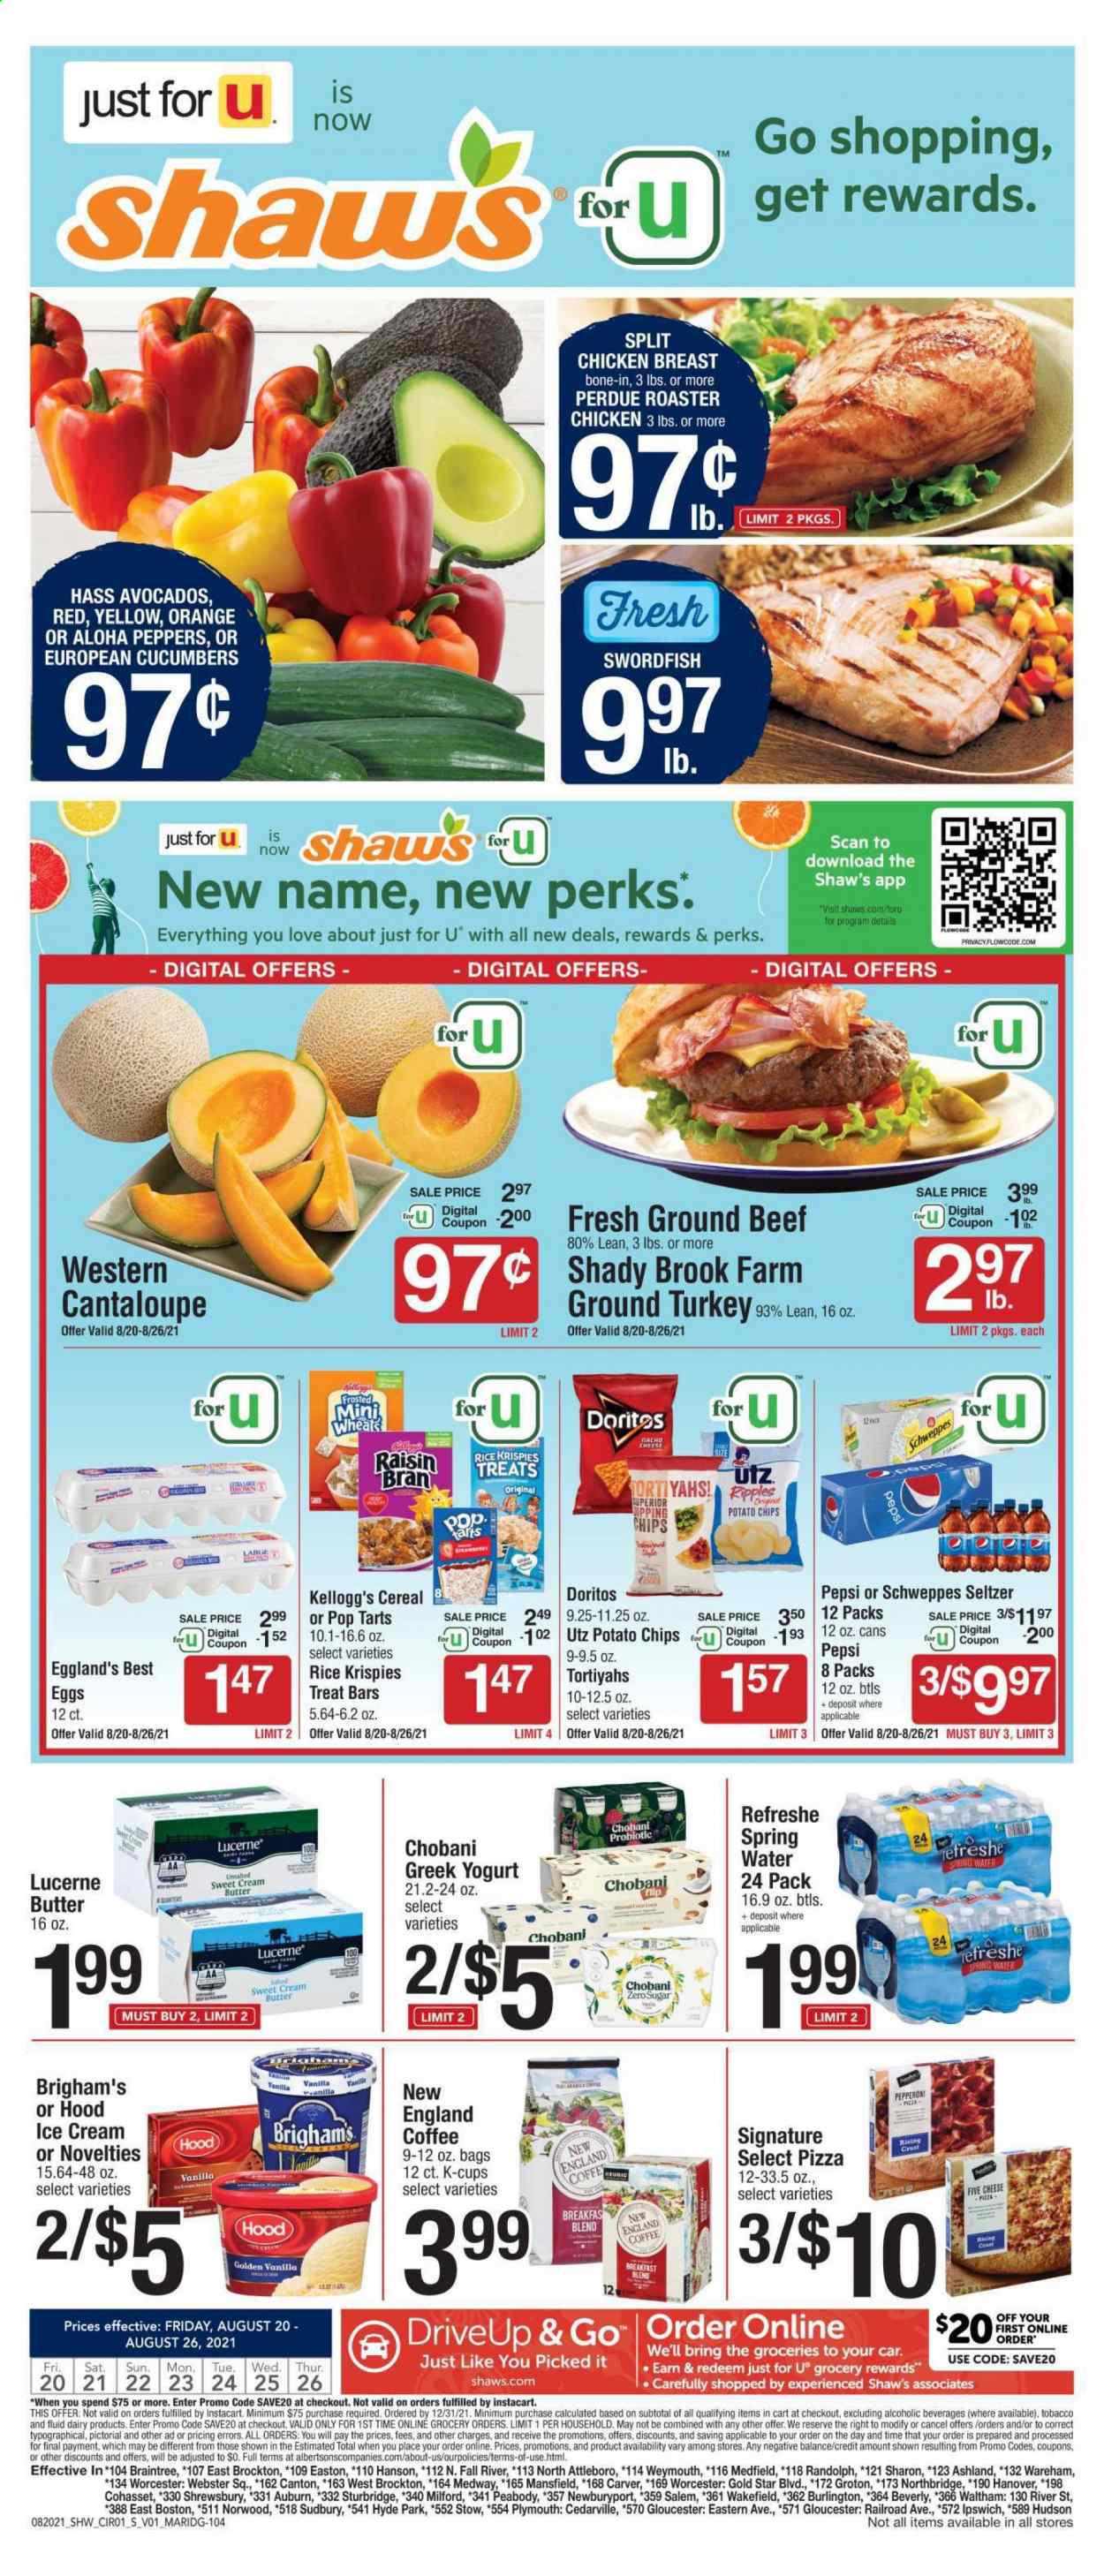 thumbnail - Shaw’s Flyer - 08/20/2021 - 08/26/2021 - Sales products - cantaloupe, cucumber, avocado, oranges, swordfish, pizza, Perdue®, pepperoni, greek yoghurt, yoghurt, Chobani, eggs, butter, ice cream, Kellogg's, Pop-Tarts, Doritos, potato chips, chips, cereals, Rice Krispies, Raisin Bran, Schweppes, Pepsi, seltzer water, spring water, coffee, coffee capsules, K-Cups, breakfast blend, ground turkey, chicken breasts, beef meat, ground beef. Page 1.